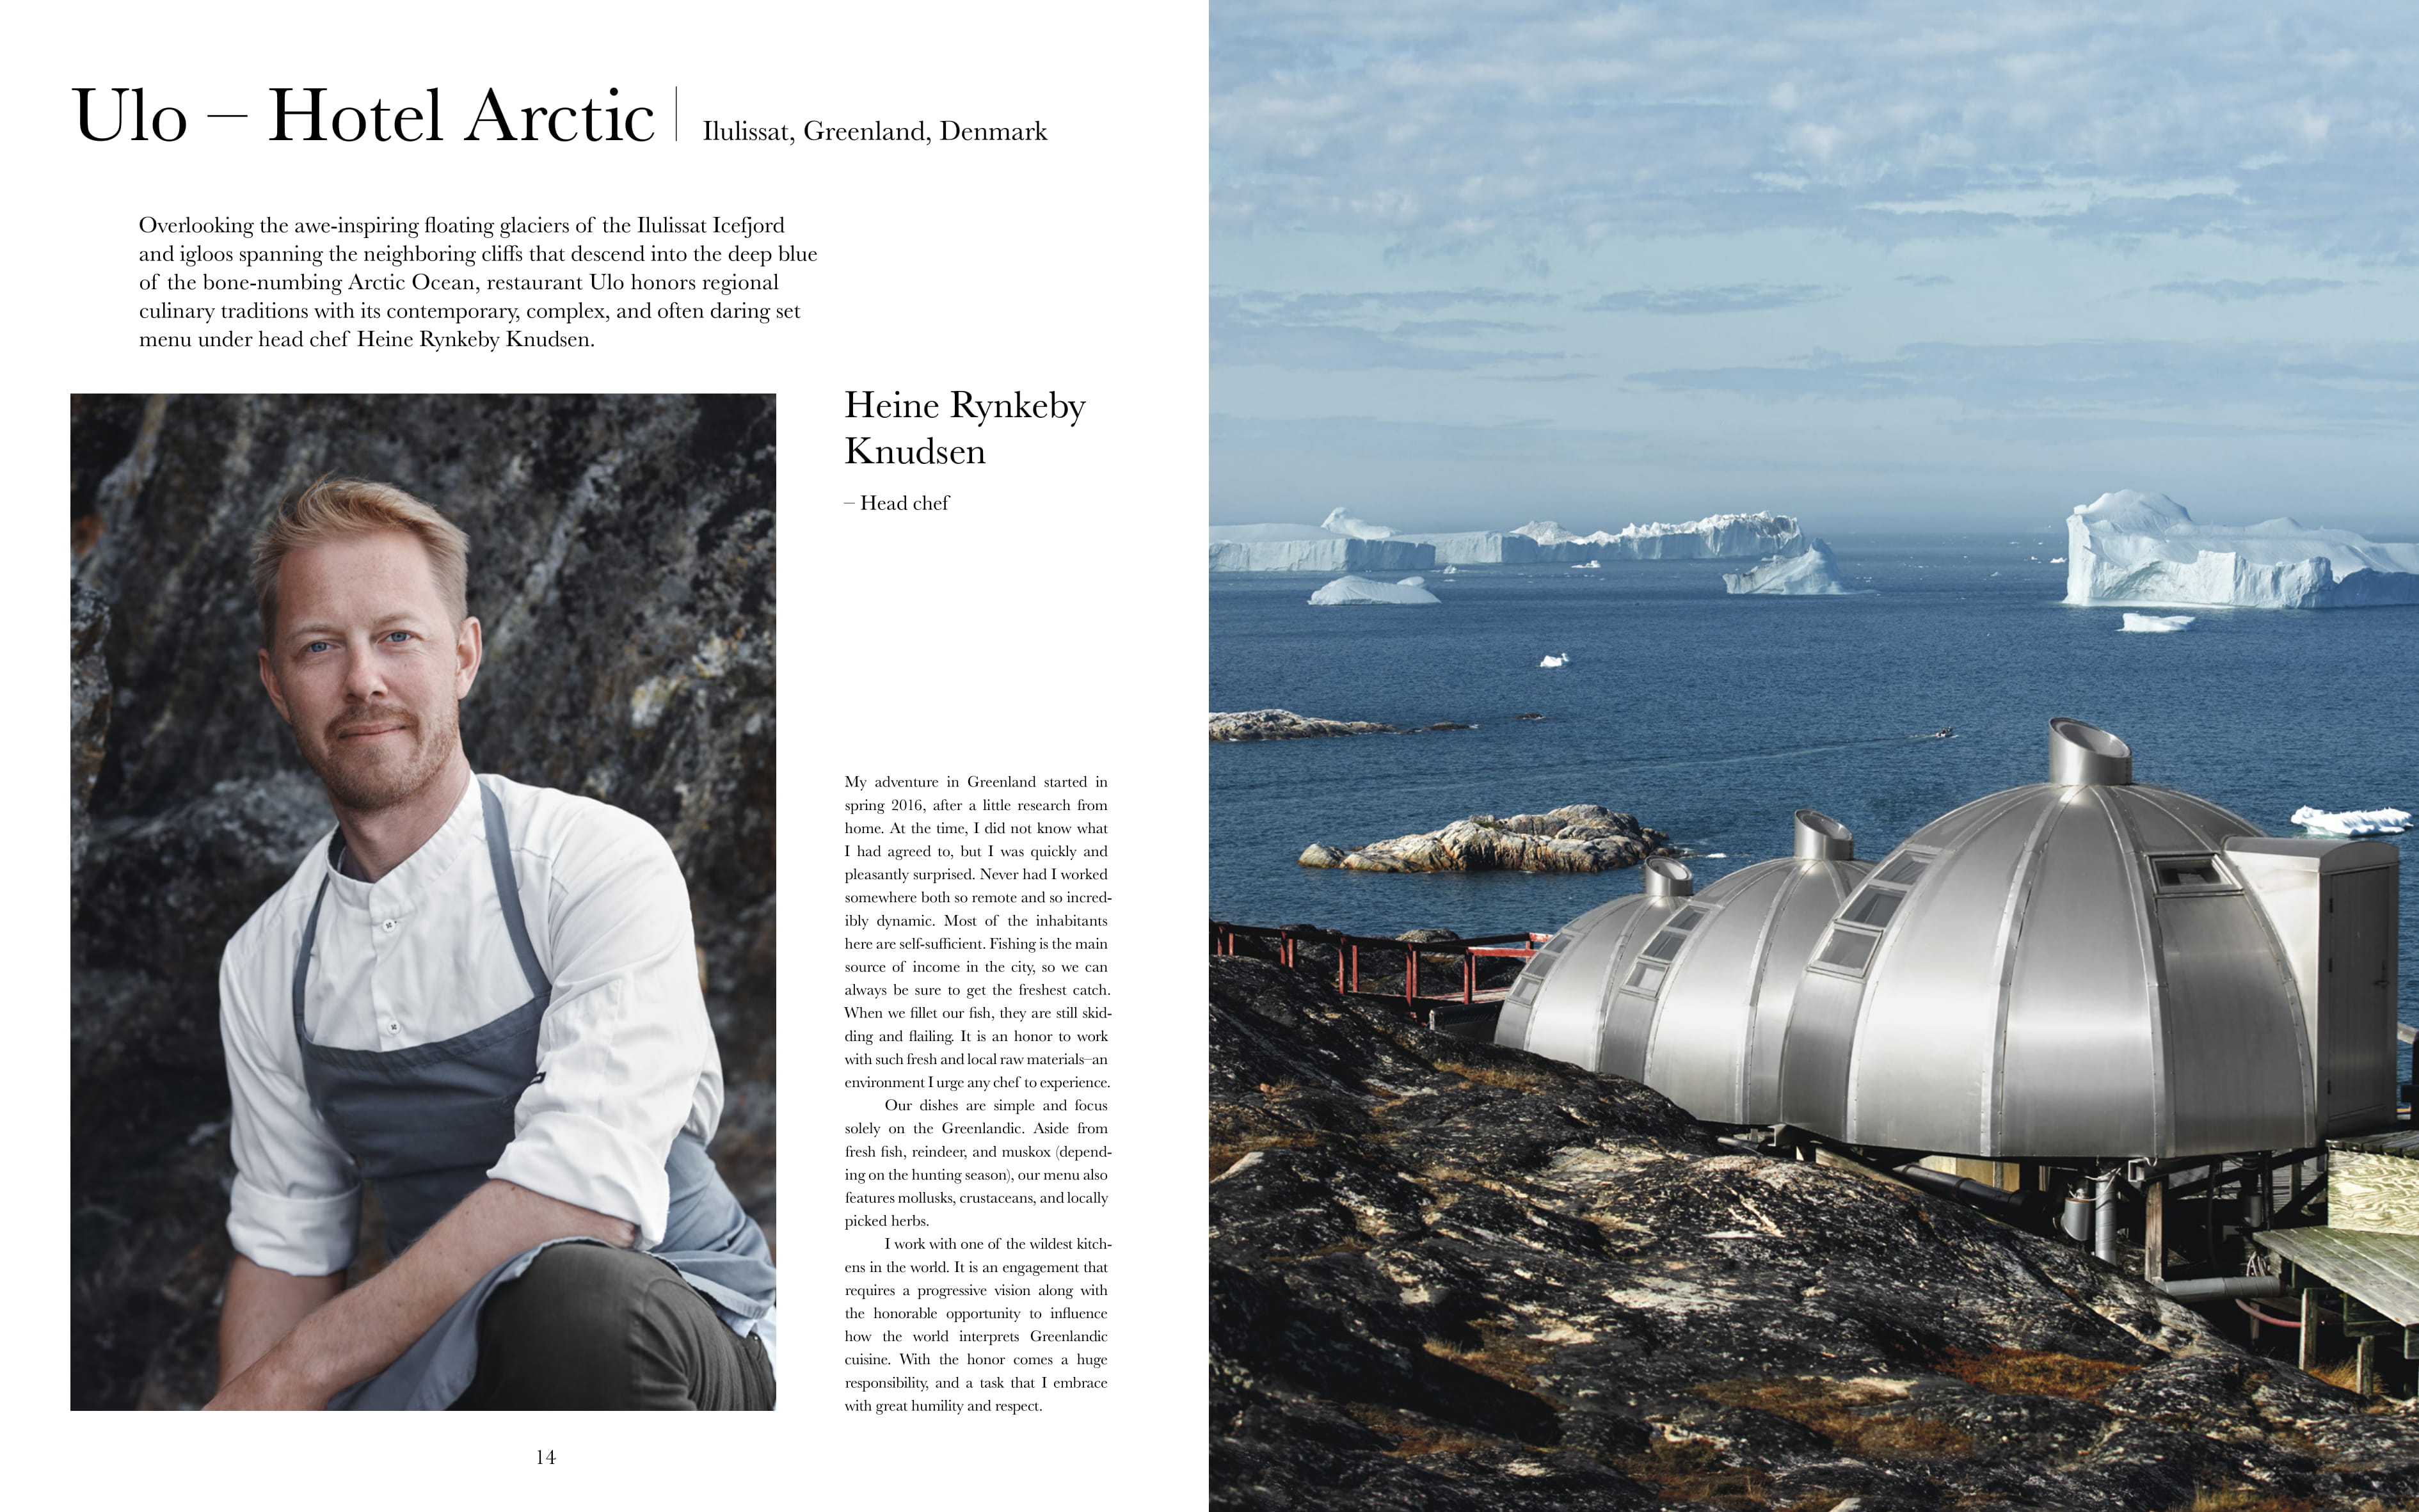 By Borderless Co. from Nordic by Nature. Nordic Cuisine and Culinary Excursions copyright Gestalten 2018
